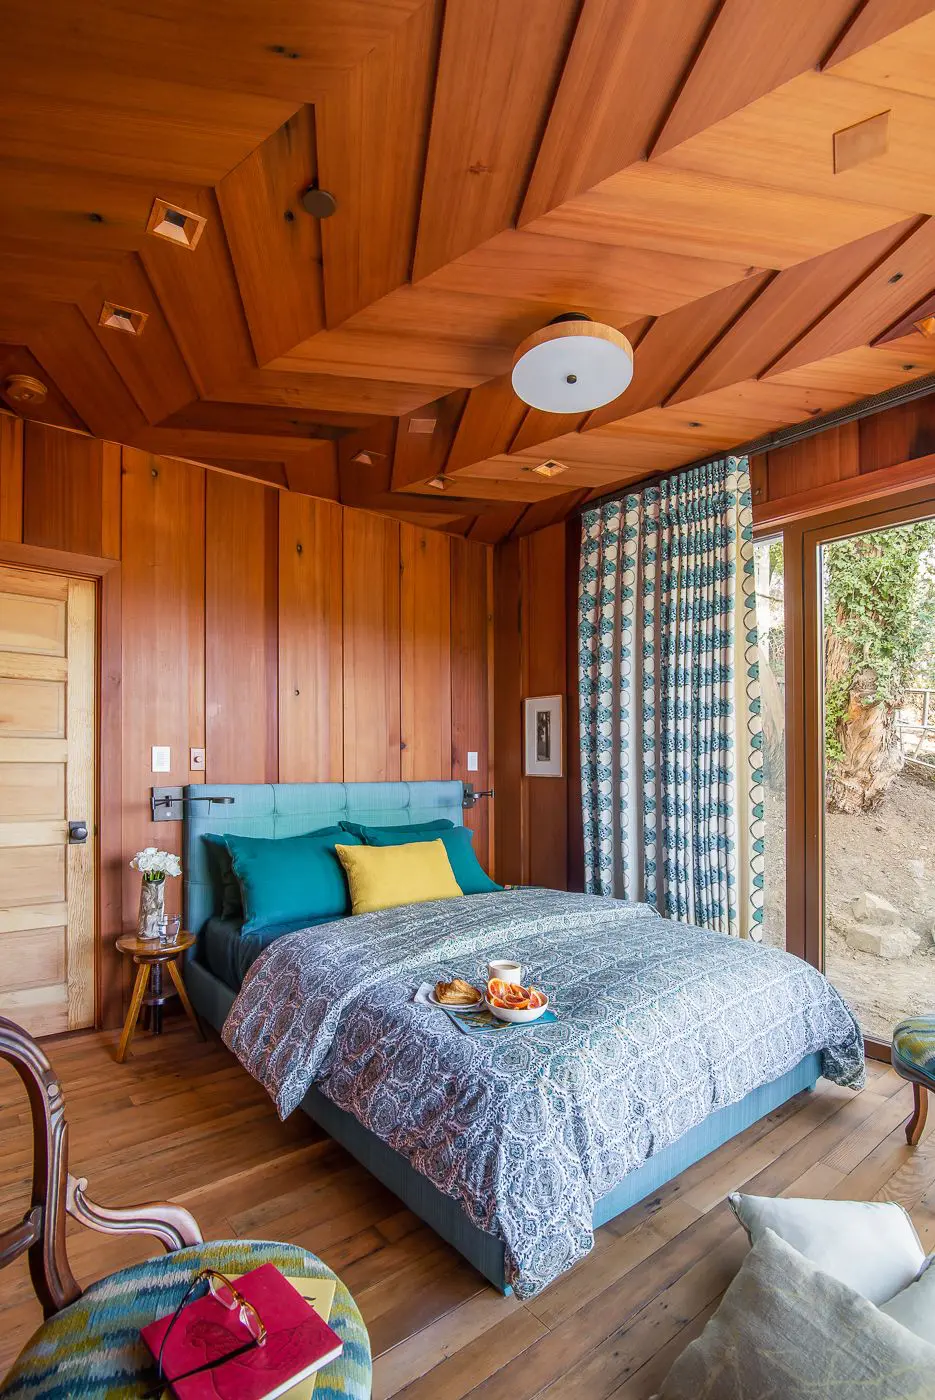 Bedroom with wood wall paneling and chevron wood ceiling and colorful bedspread; floor to ceiling curtains on sliding door to outside - photo